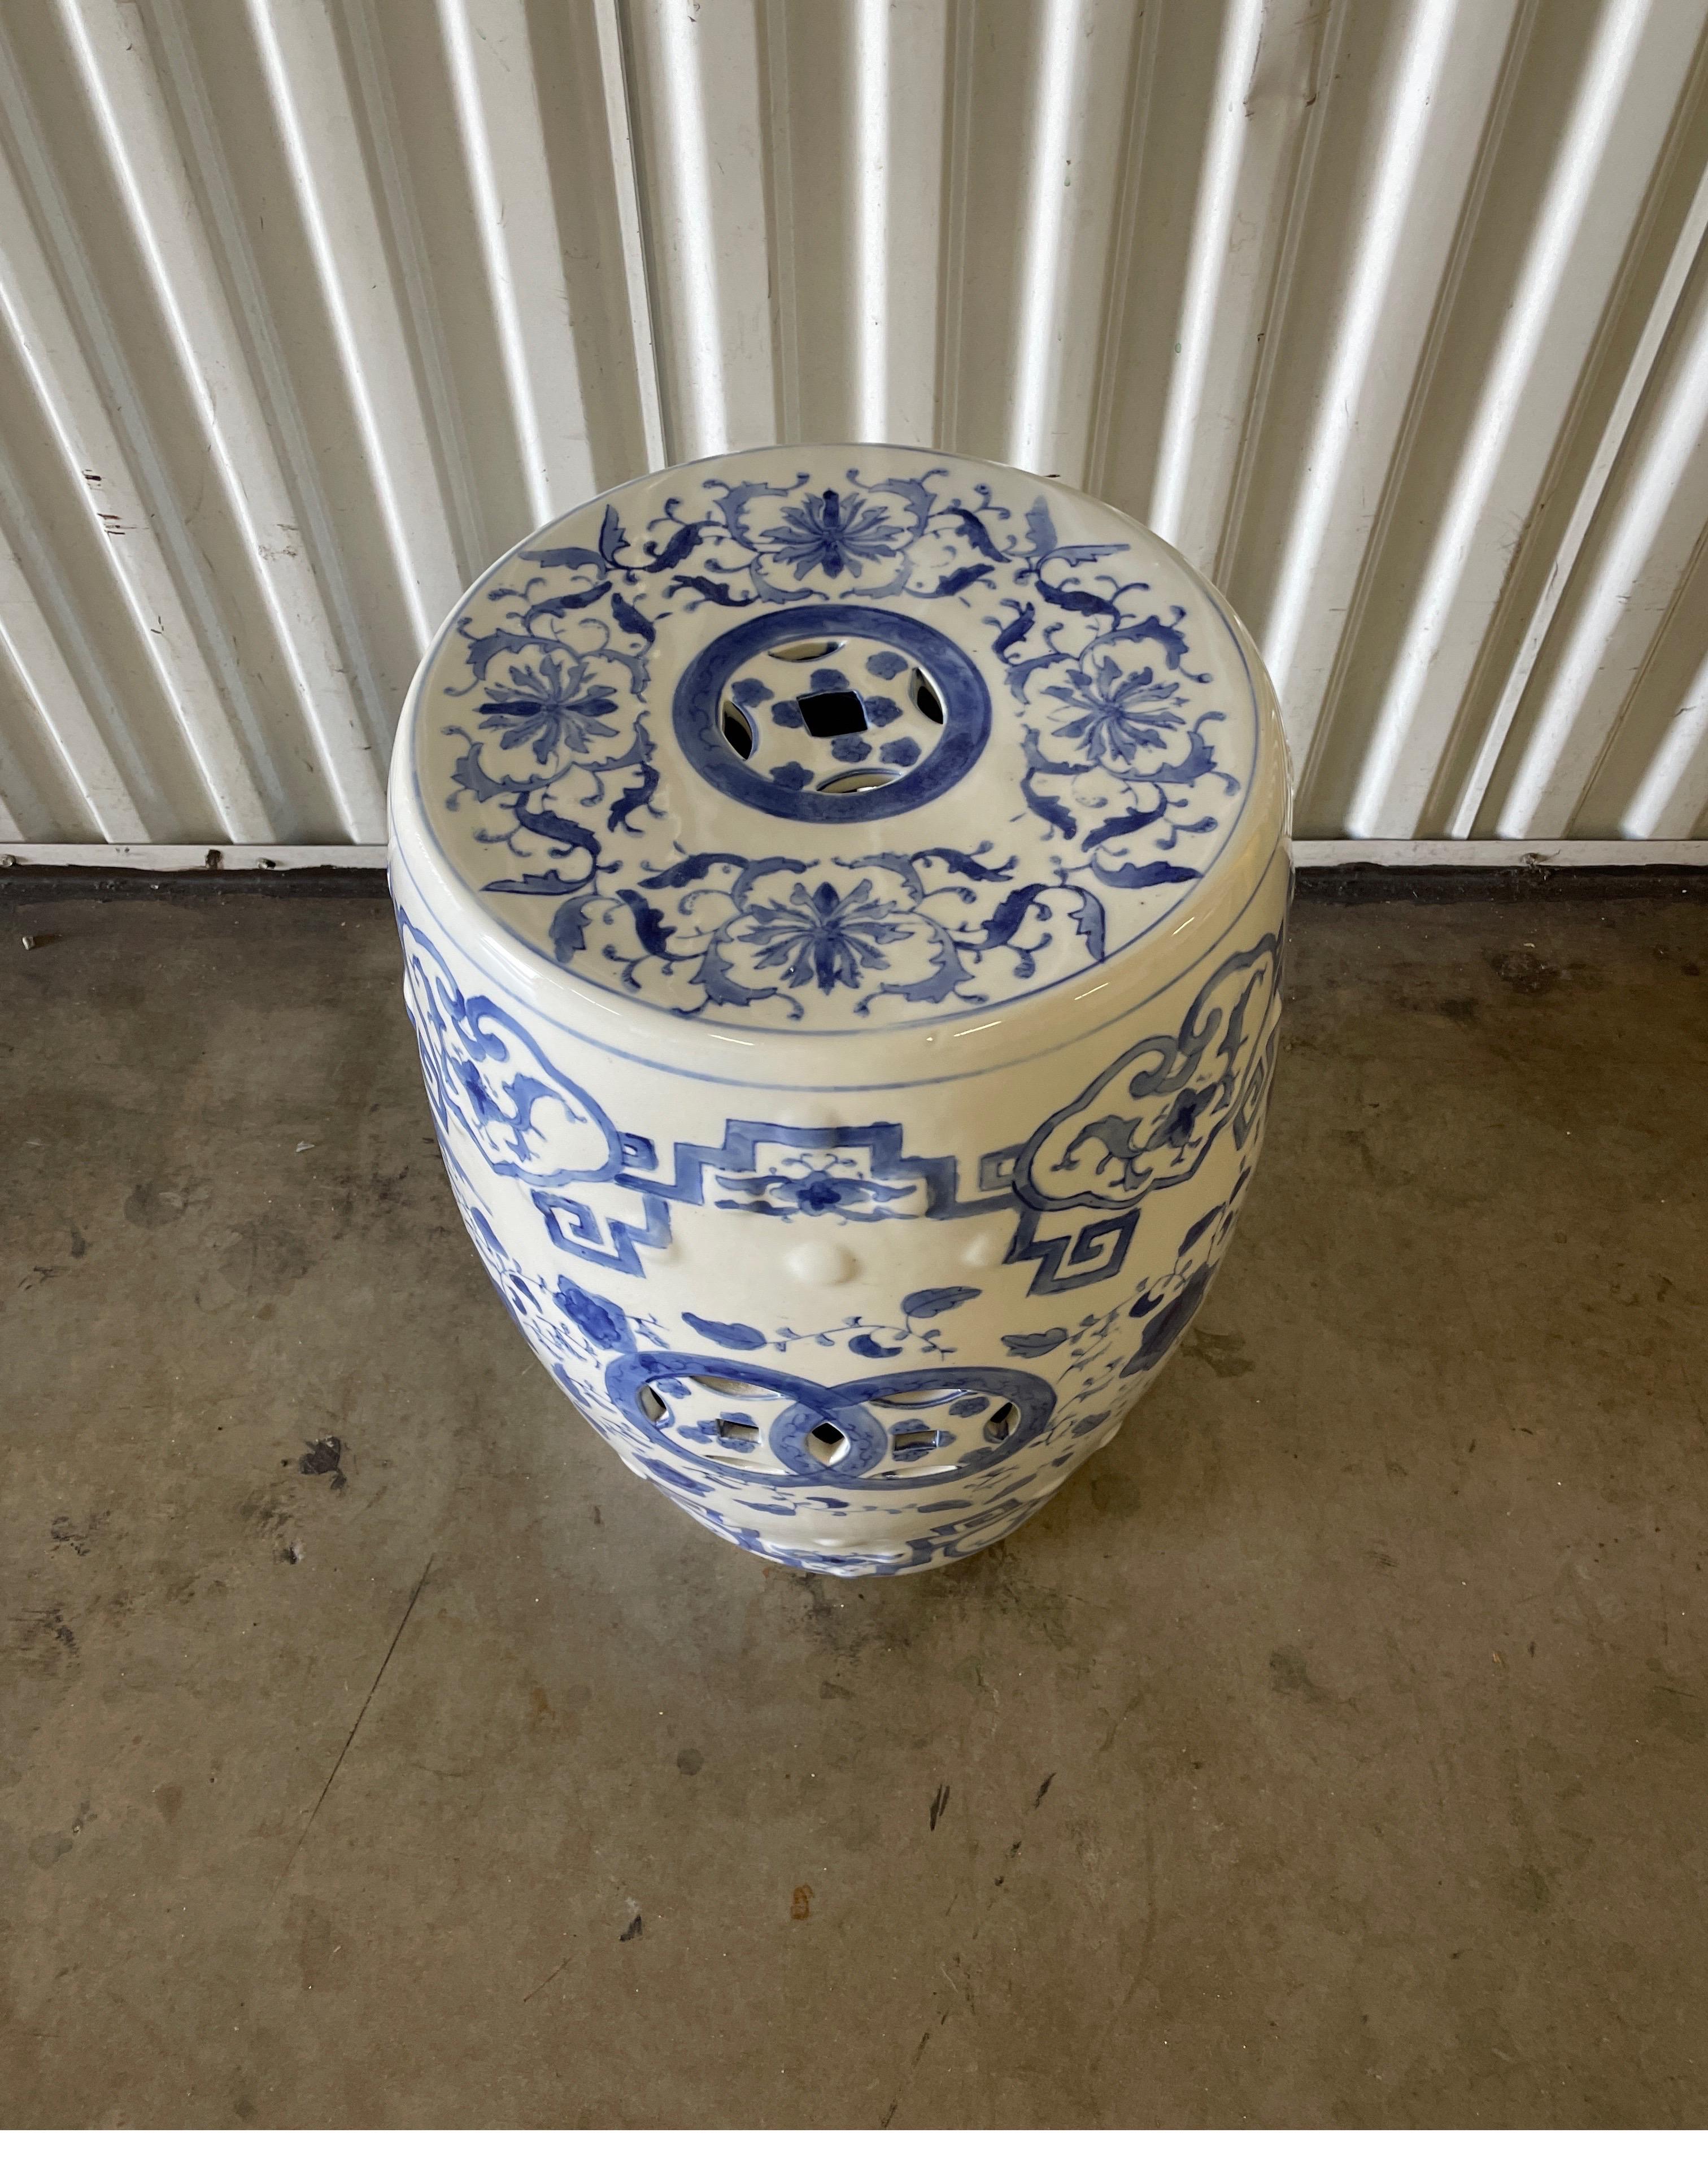 Vintage blue & white Chinese garden seat with an overall floral leaf design.
Will brighten up any setting.